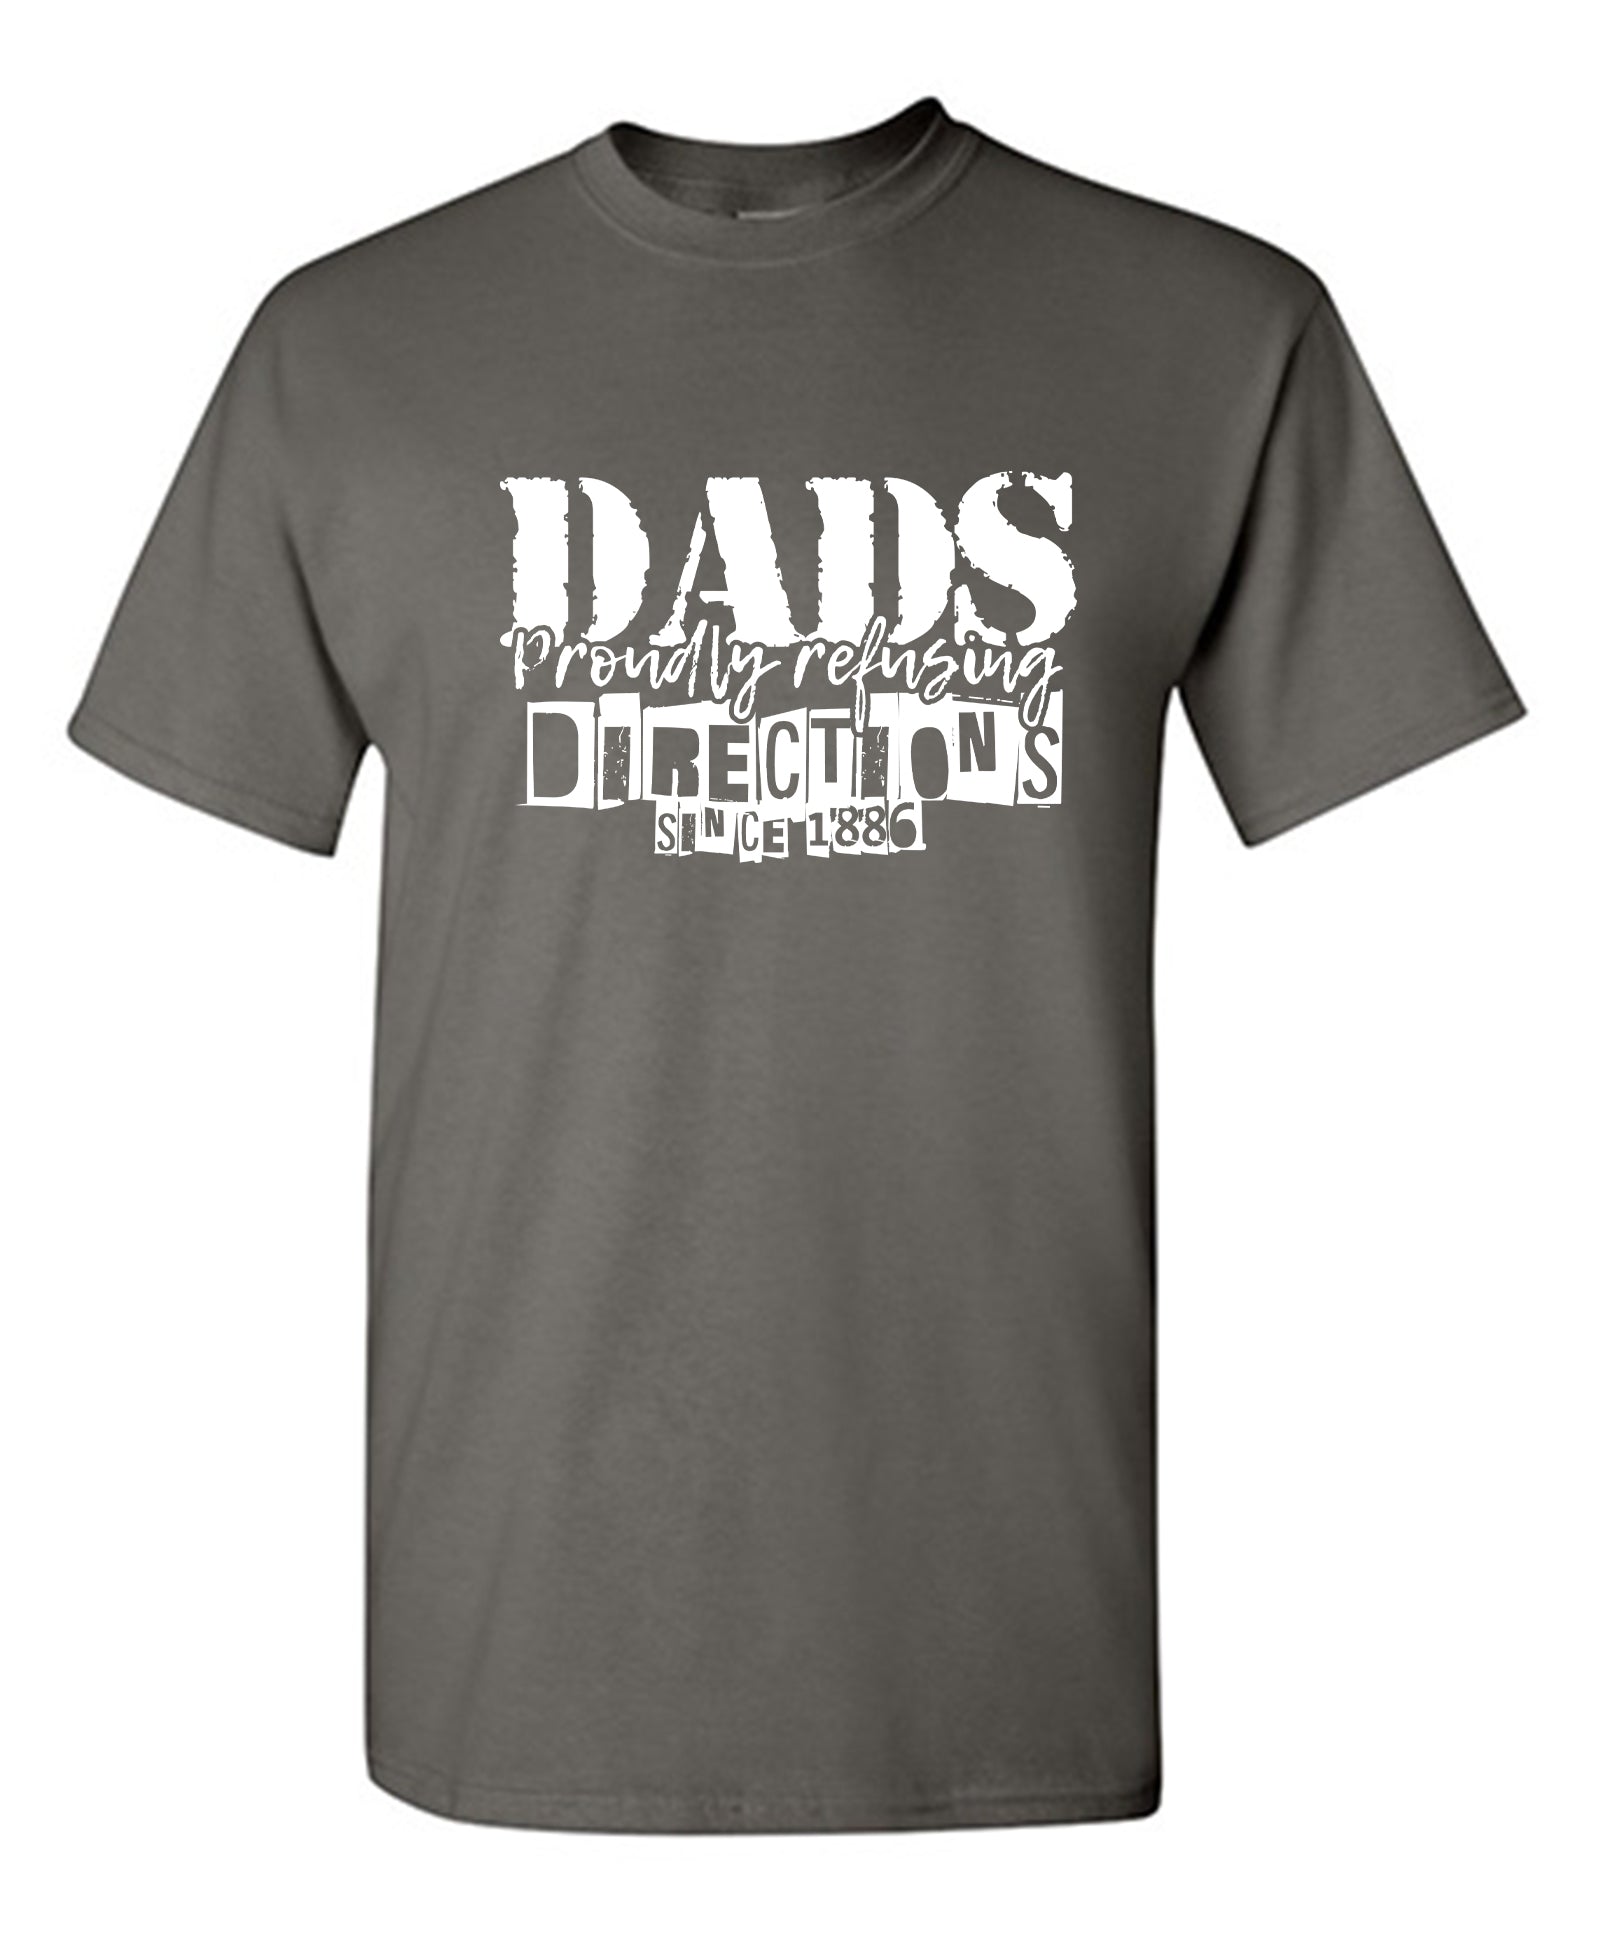 Dads Proudly Refusing Directions, Since 1886 - Funny T Shirts & Graphic Tees